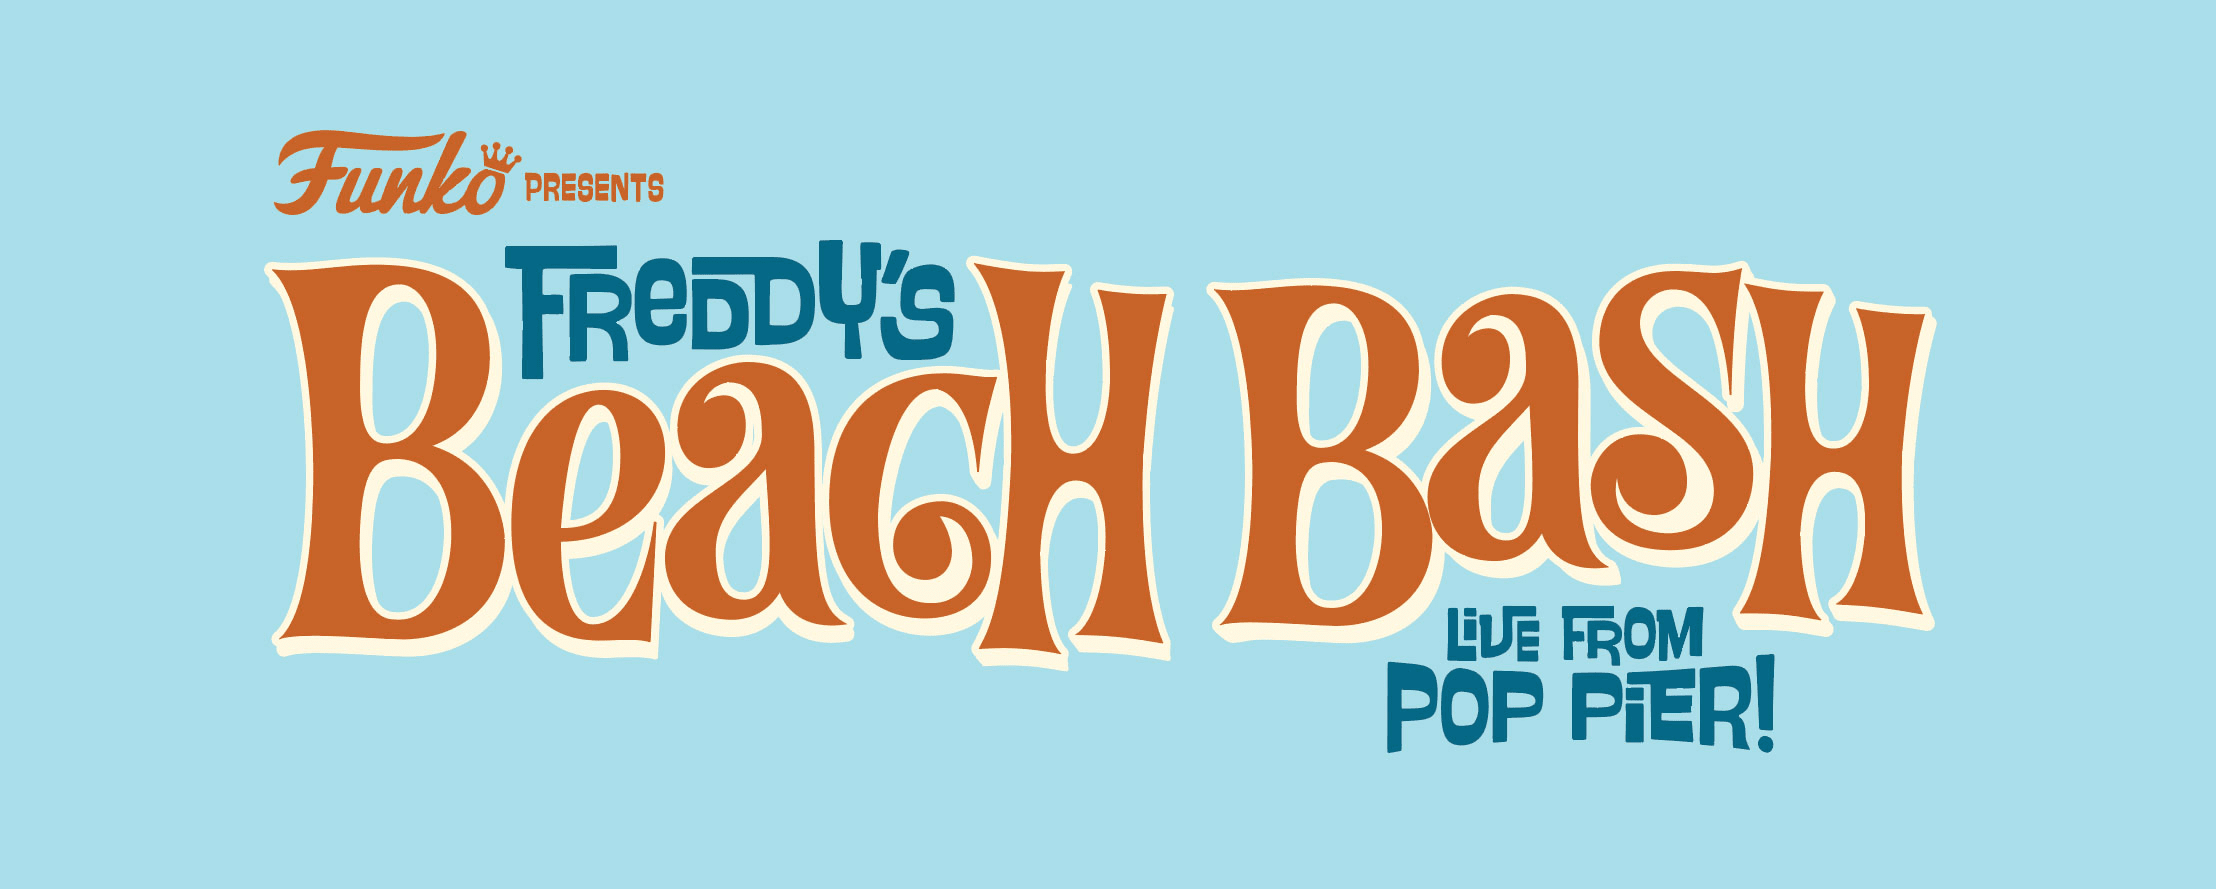 Funko To Host Exclusive Beach Bash Live From Pop Pier At WonderCon 2022